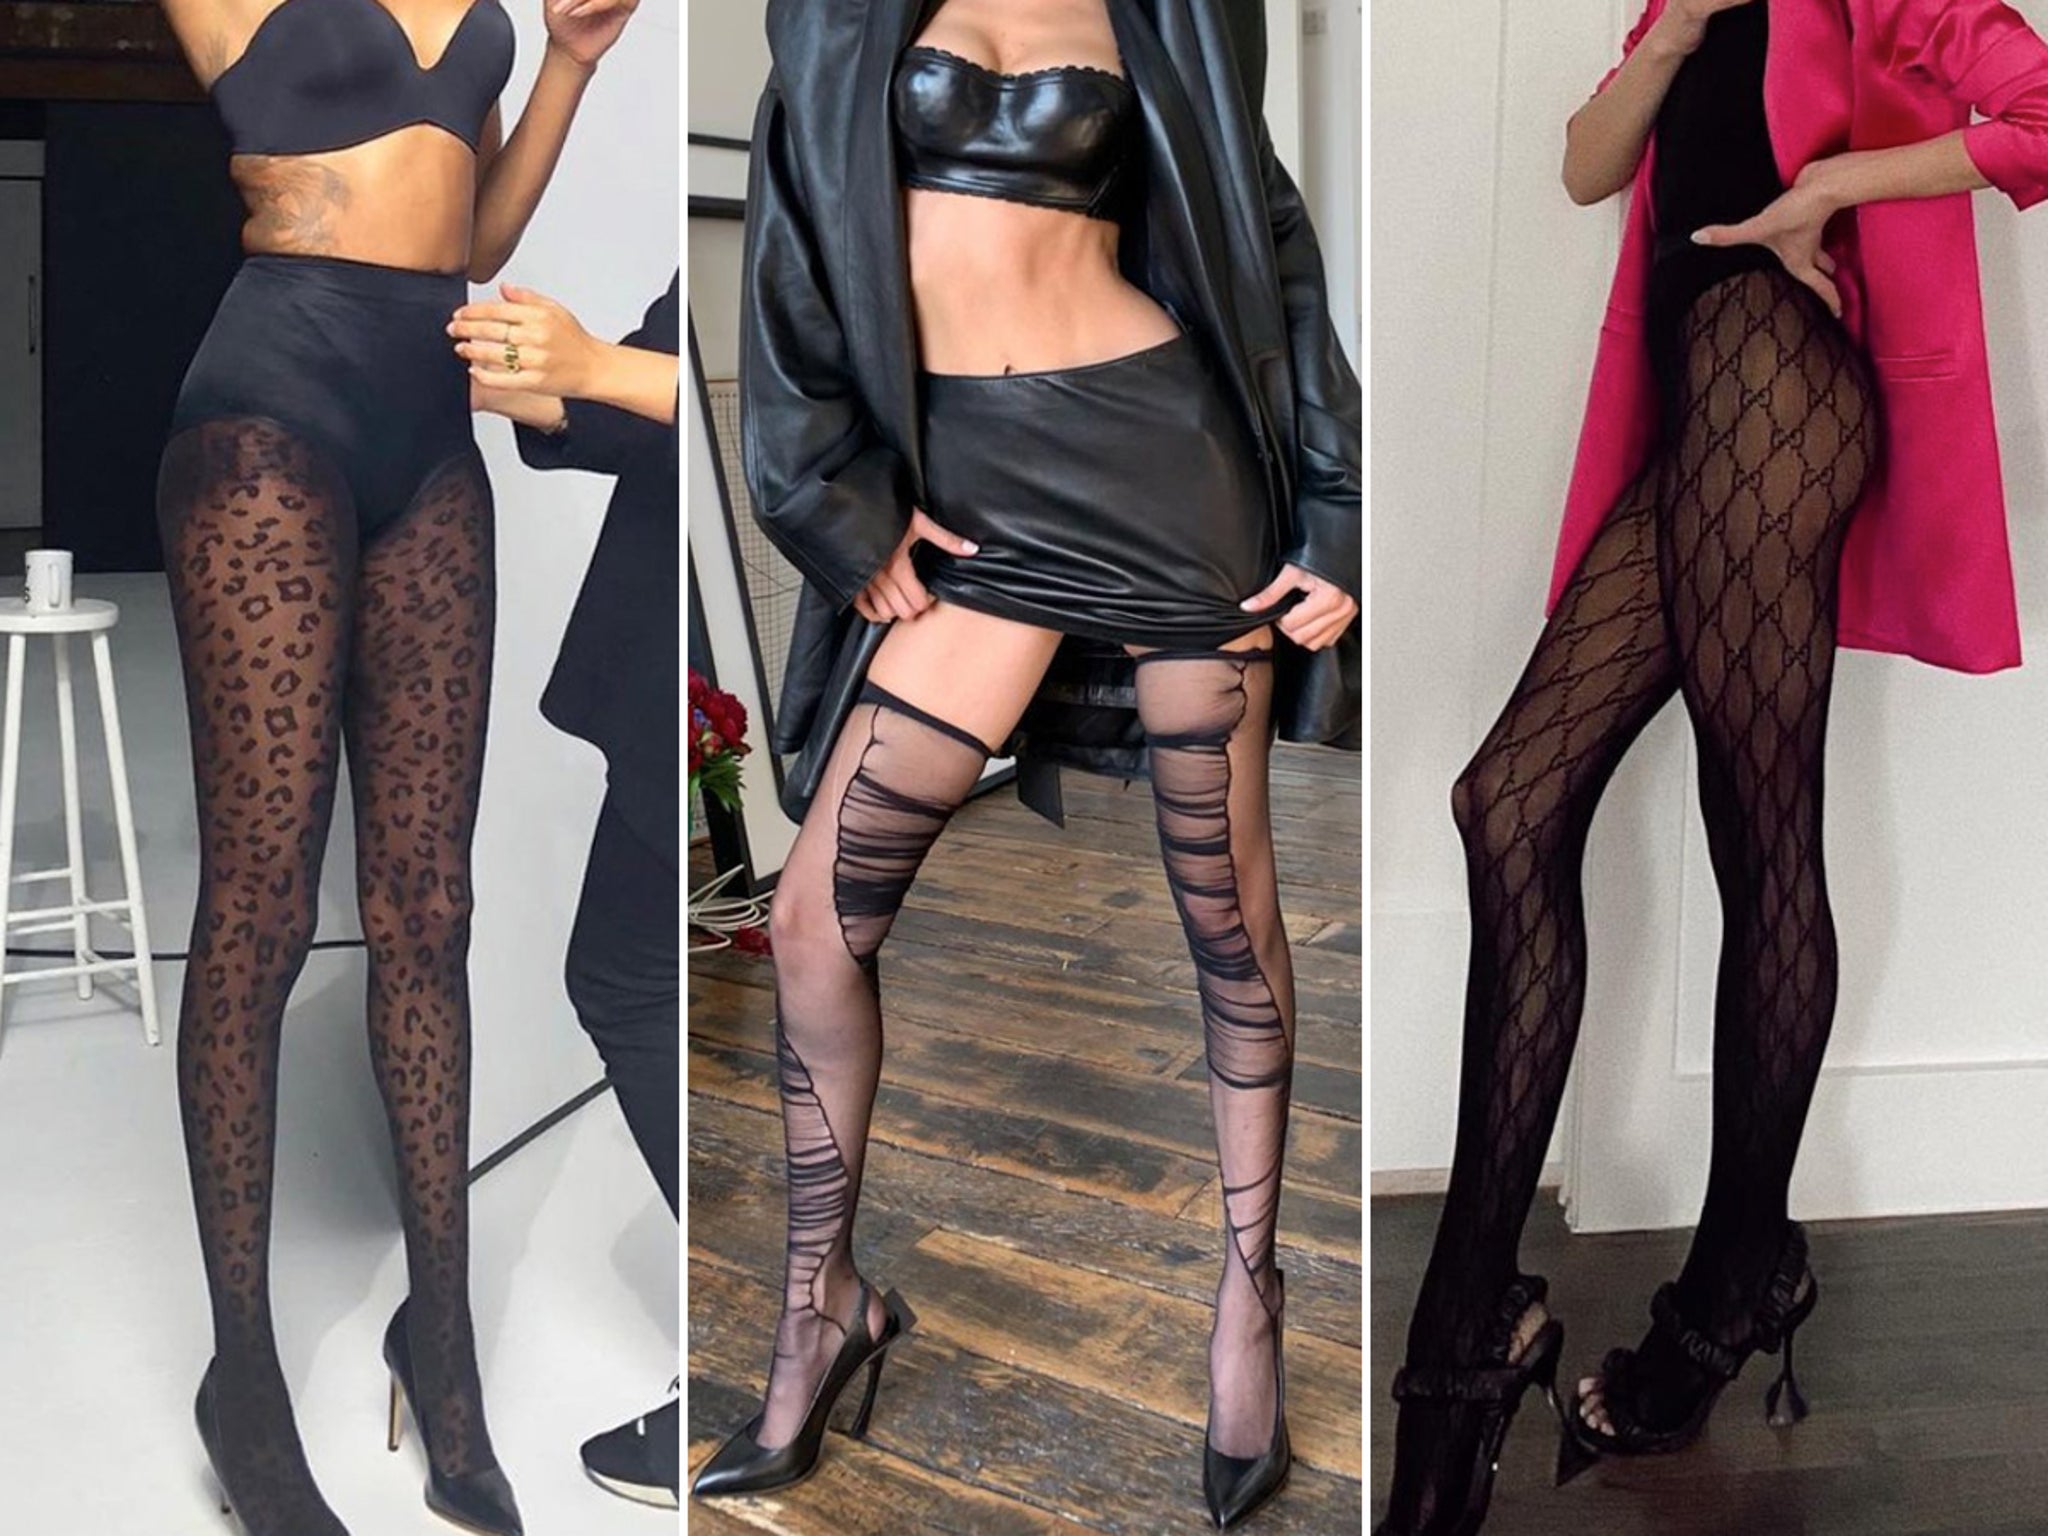 divine quinto share hot moms in stockings photos